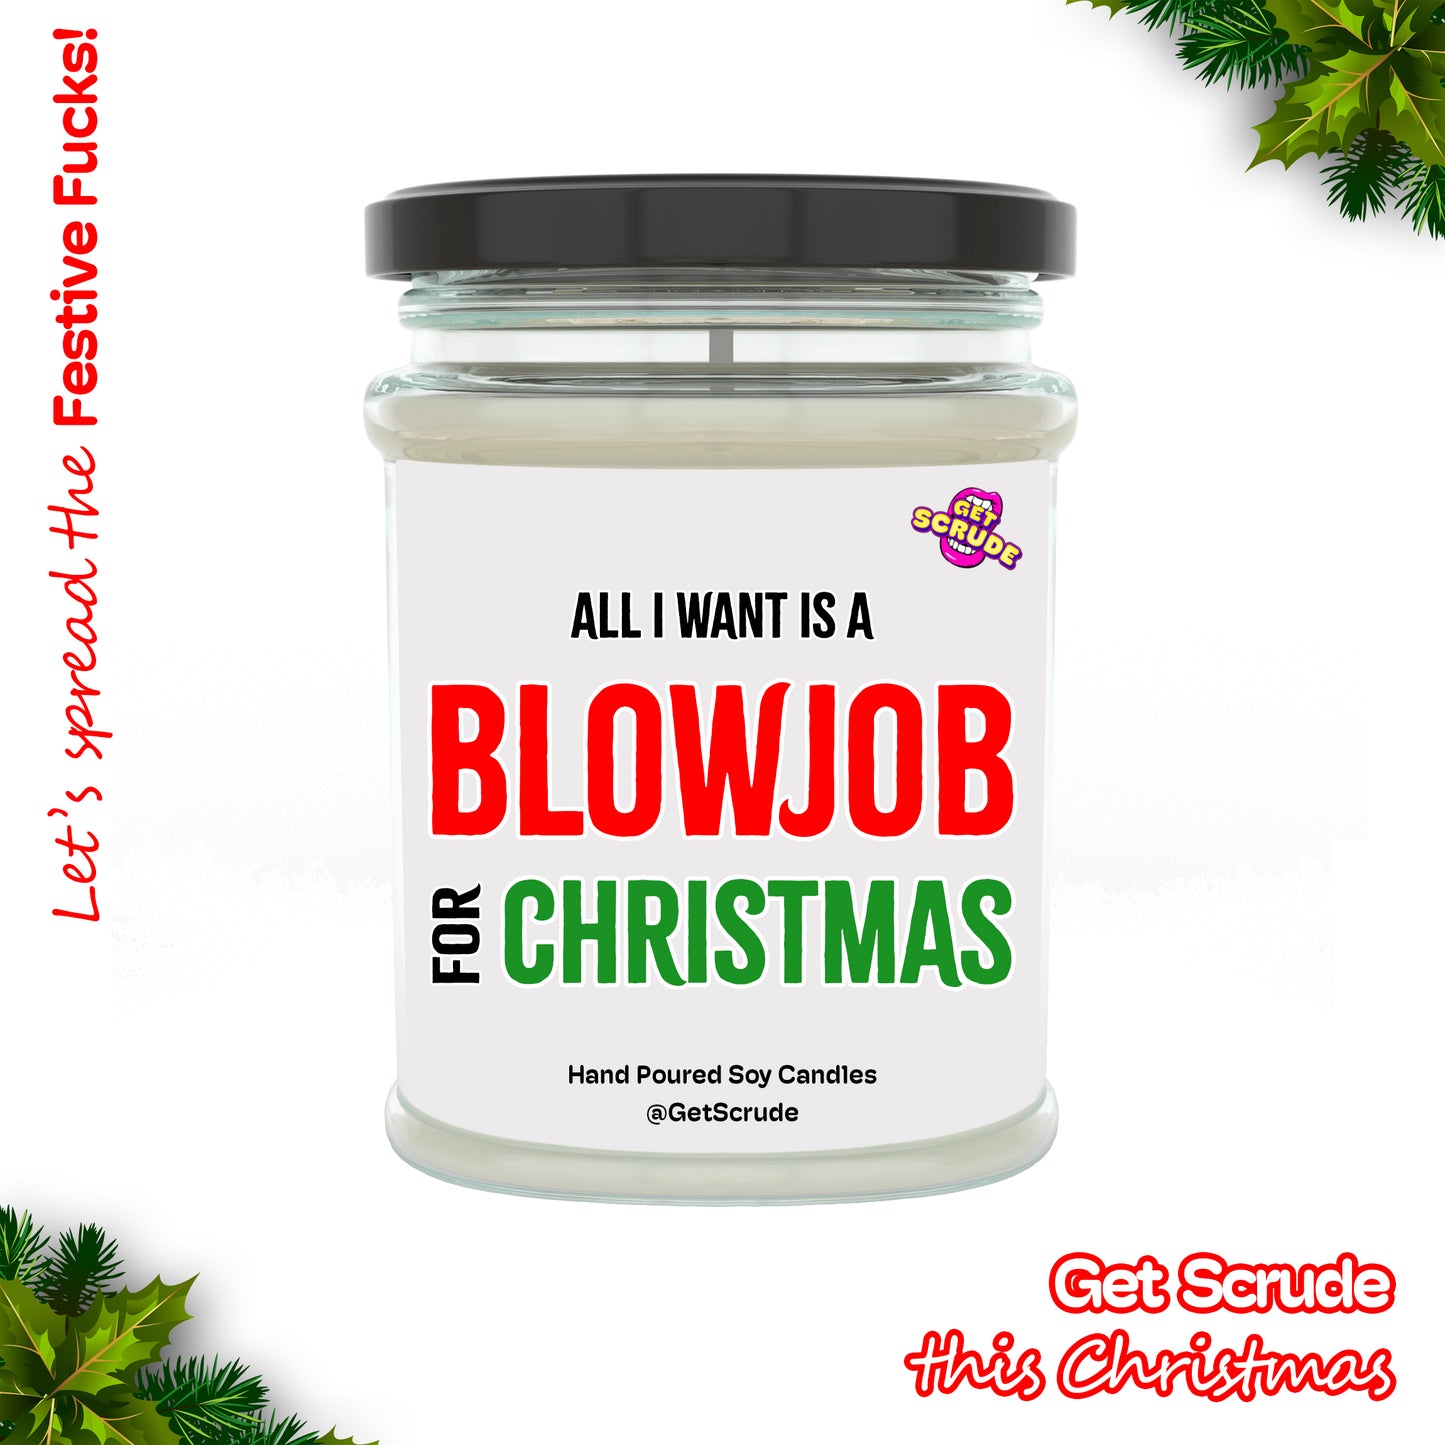 All I want for Christmas (BLOWJOB)